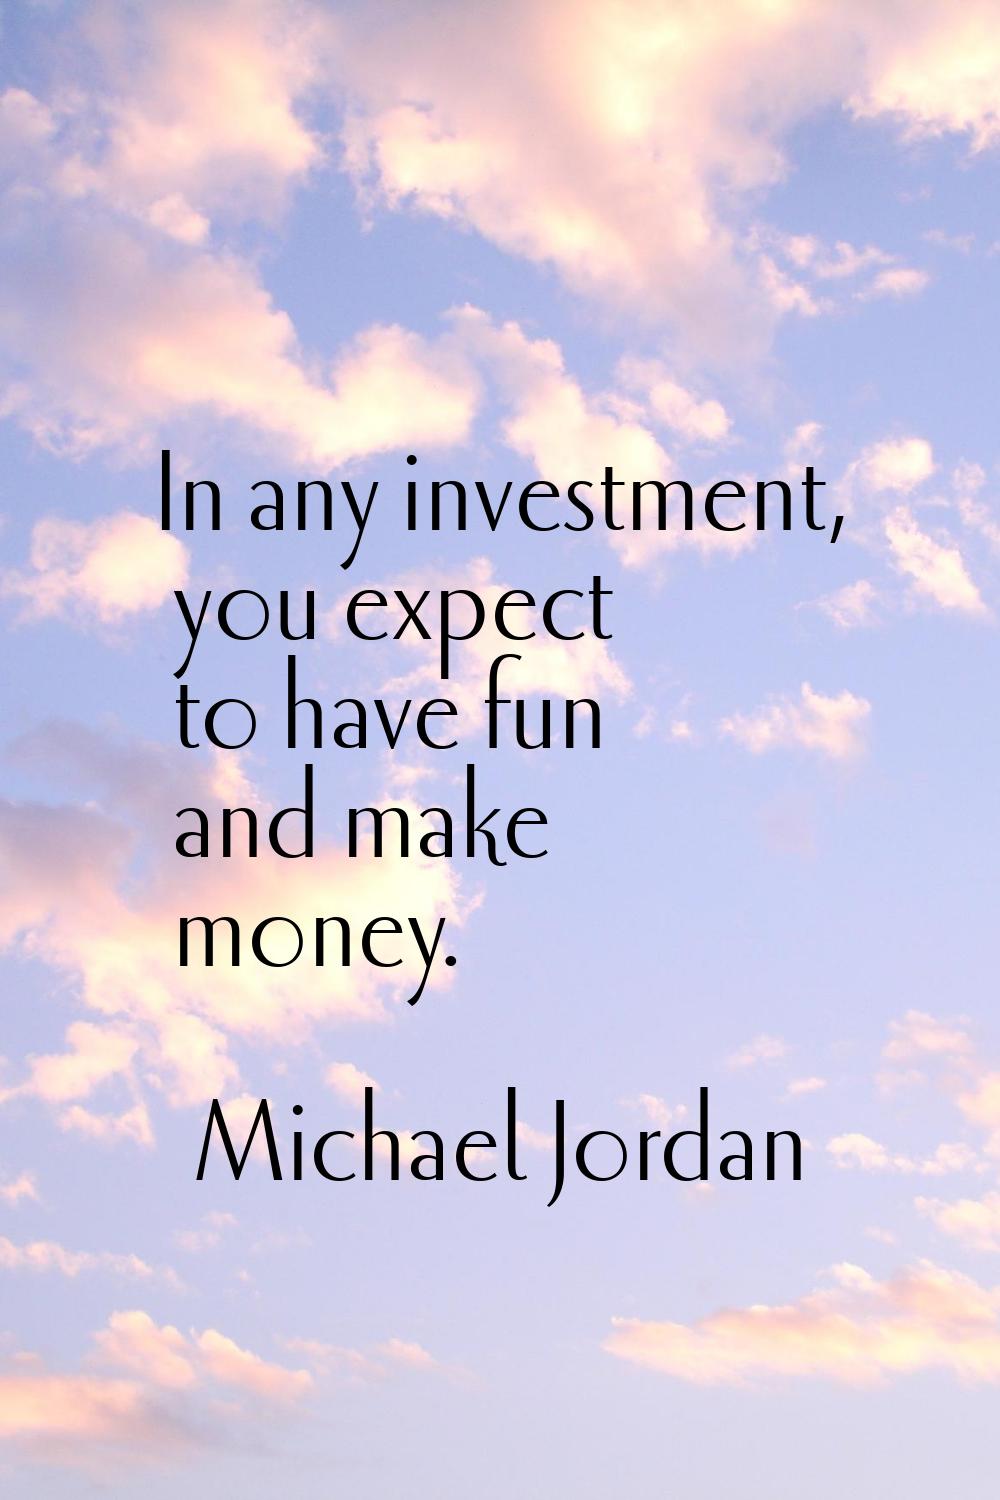 In any investment, you expect to have fun and make money.